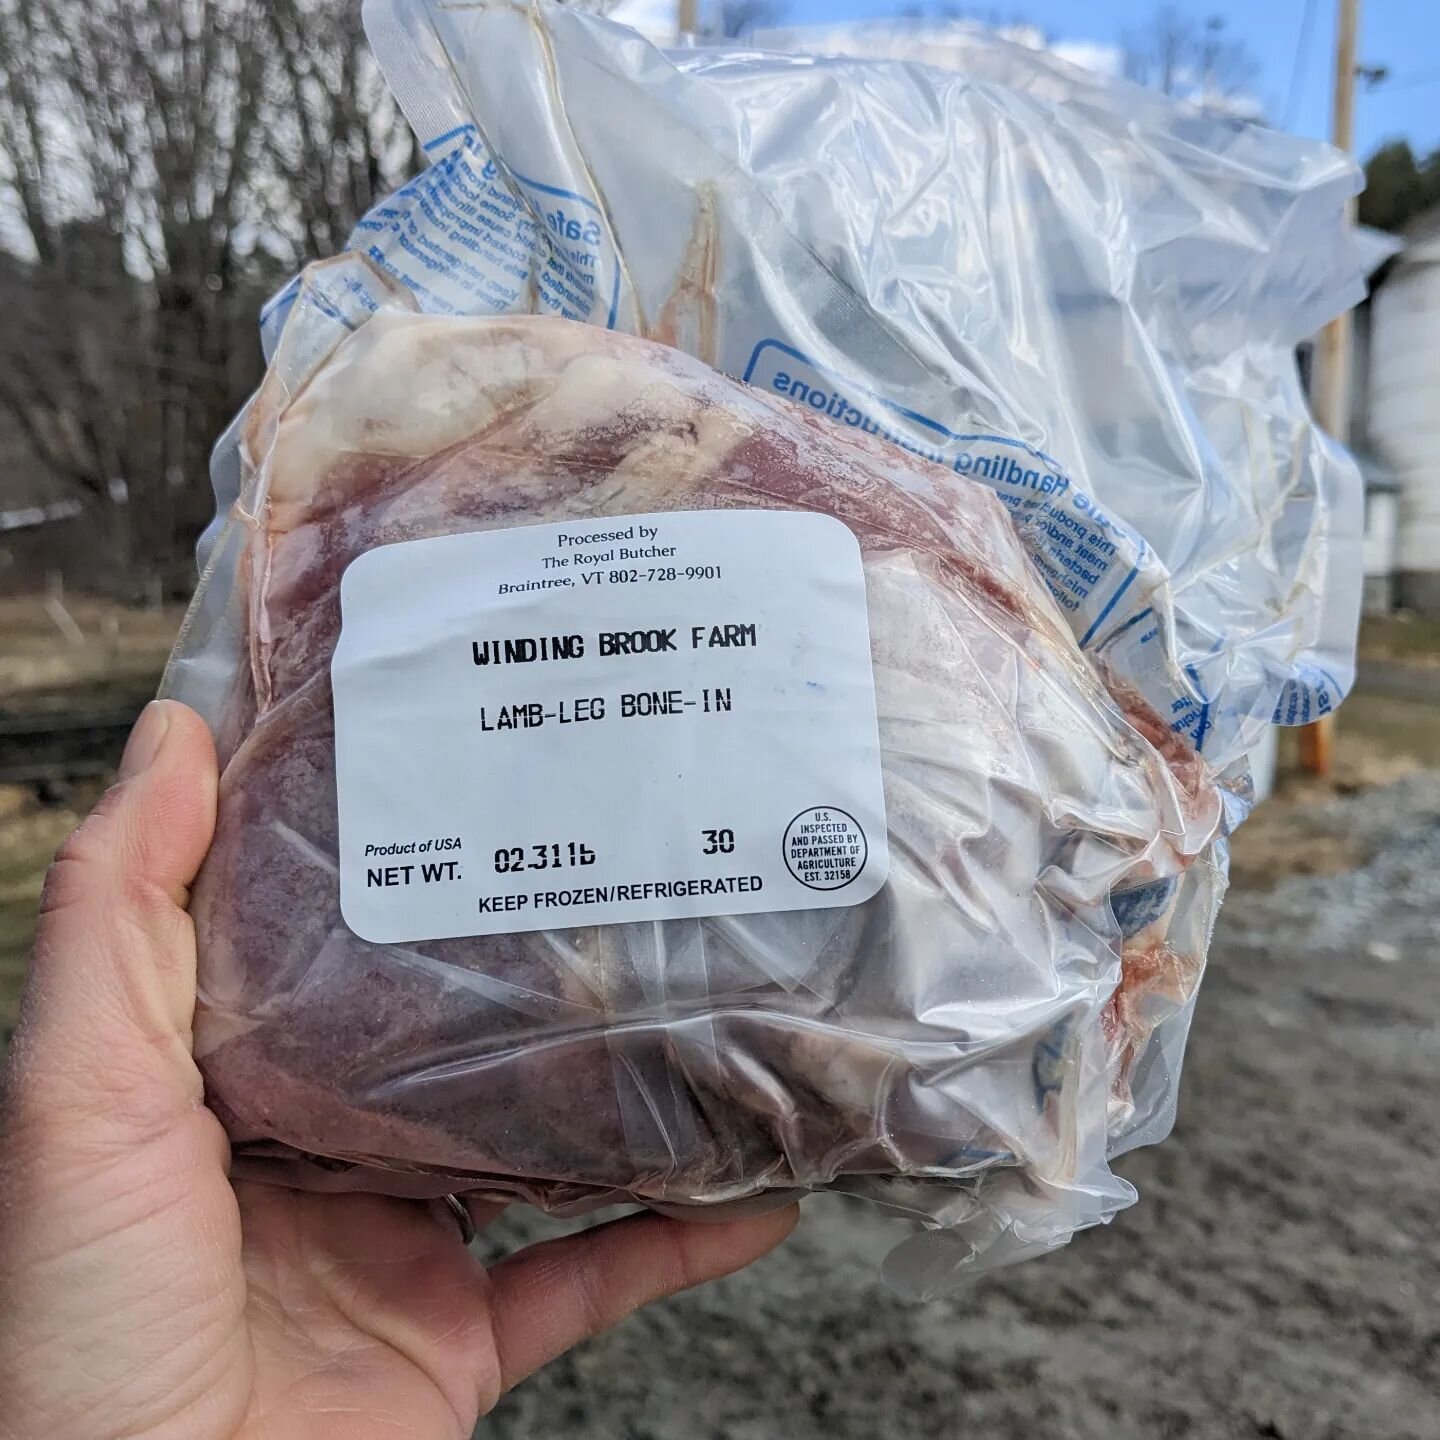 We have lamb cuts available for Easter!  Order on our website - we have limited farm stand freezer space so most of our lamb is by preorder only. 

Square will tell you that pick up is Monday, but get your orders in now and we'll have them ready for 